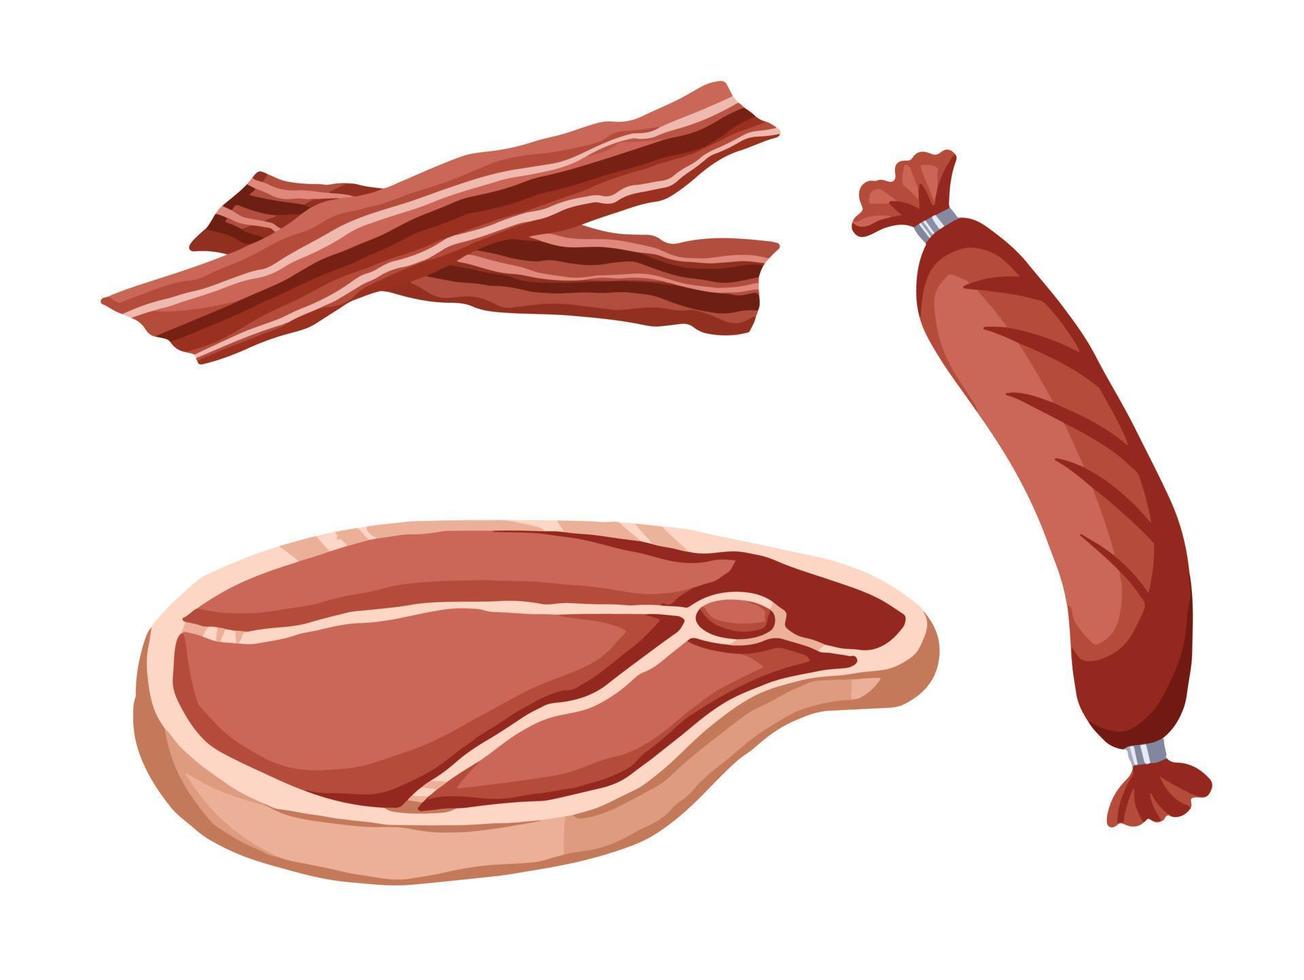 Raw and cooked meat, sausage and bacon slice. Carnivore bbq preparation meat ingridient. Yummy food vector illustration with flat art style colored.